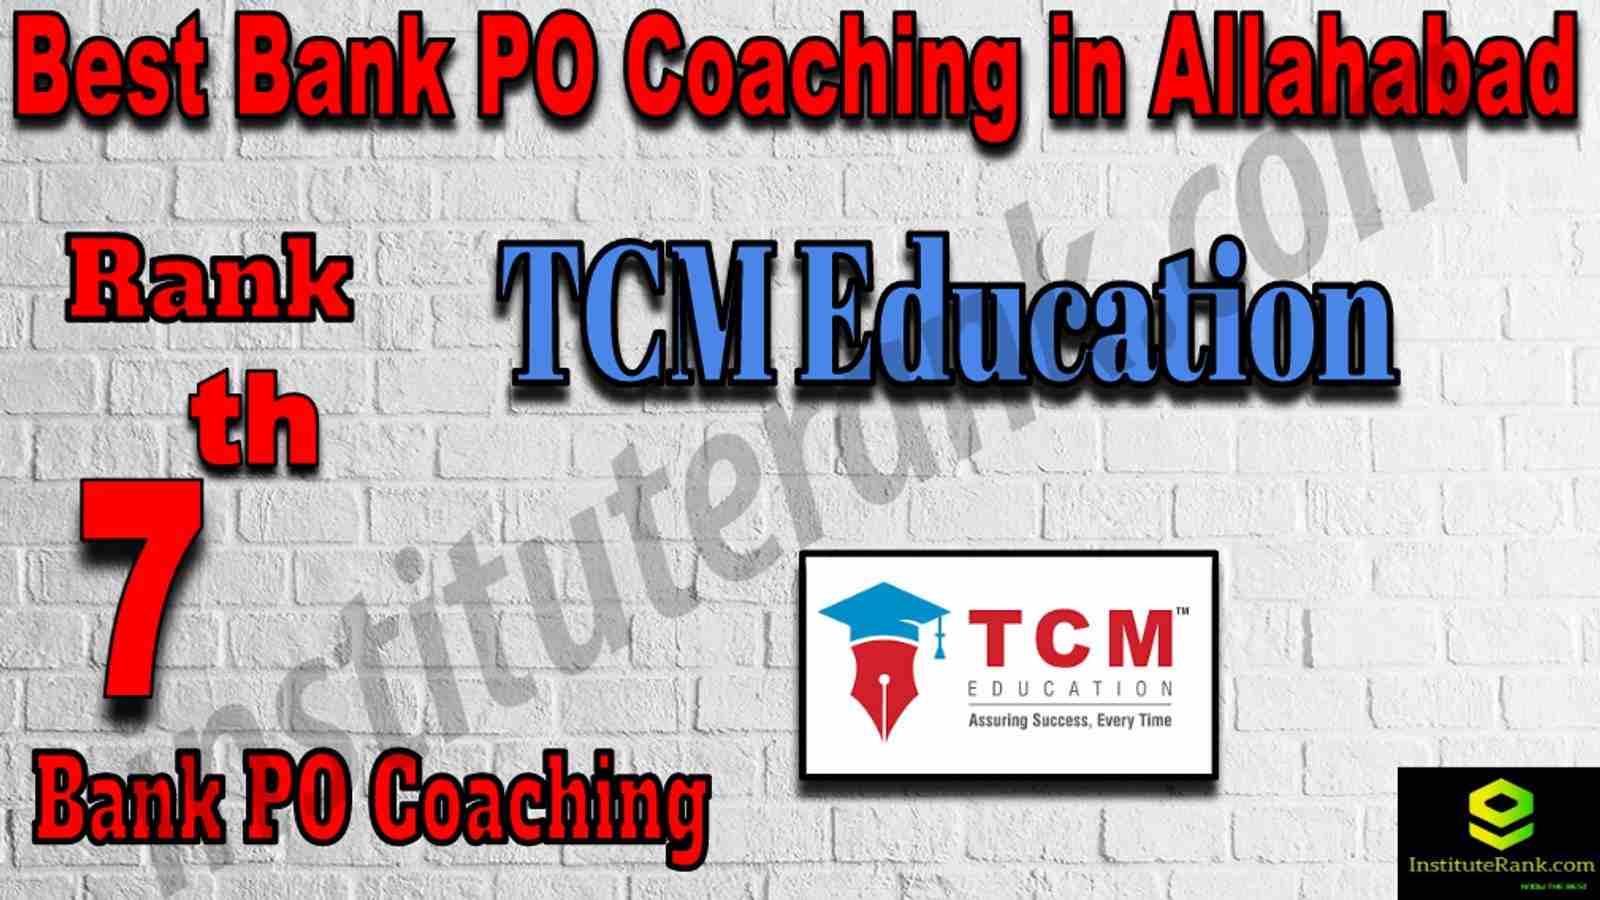 7th Best Bank PO Coaching in Allahabad